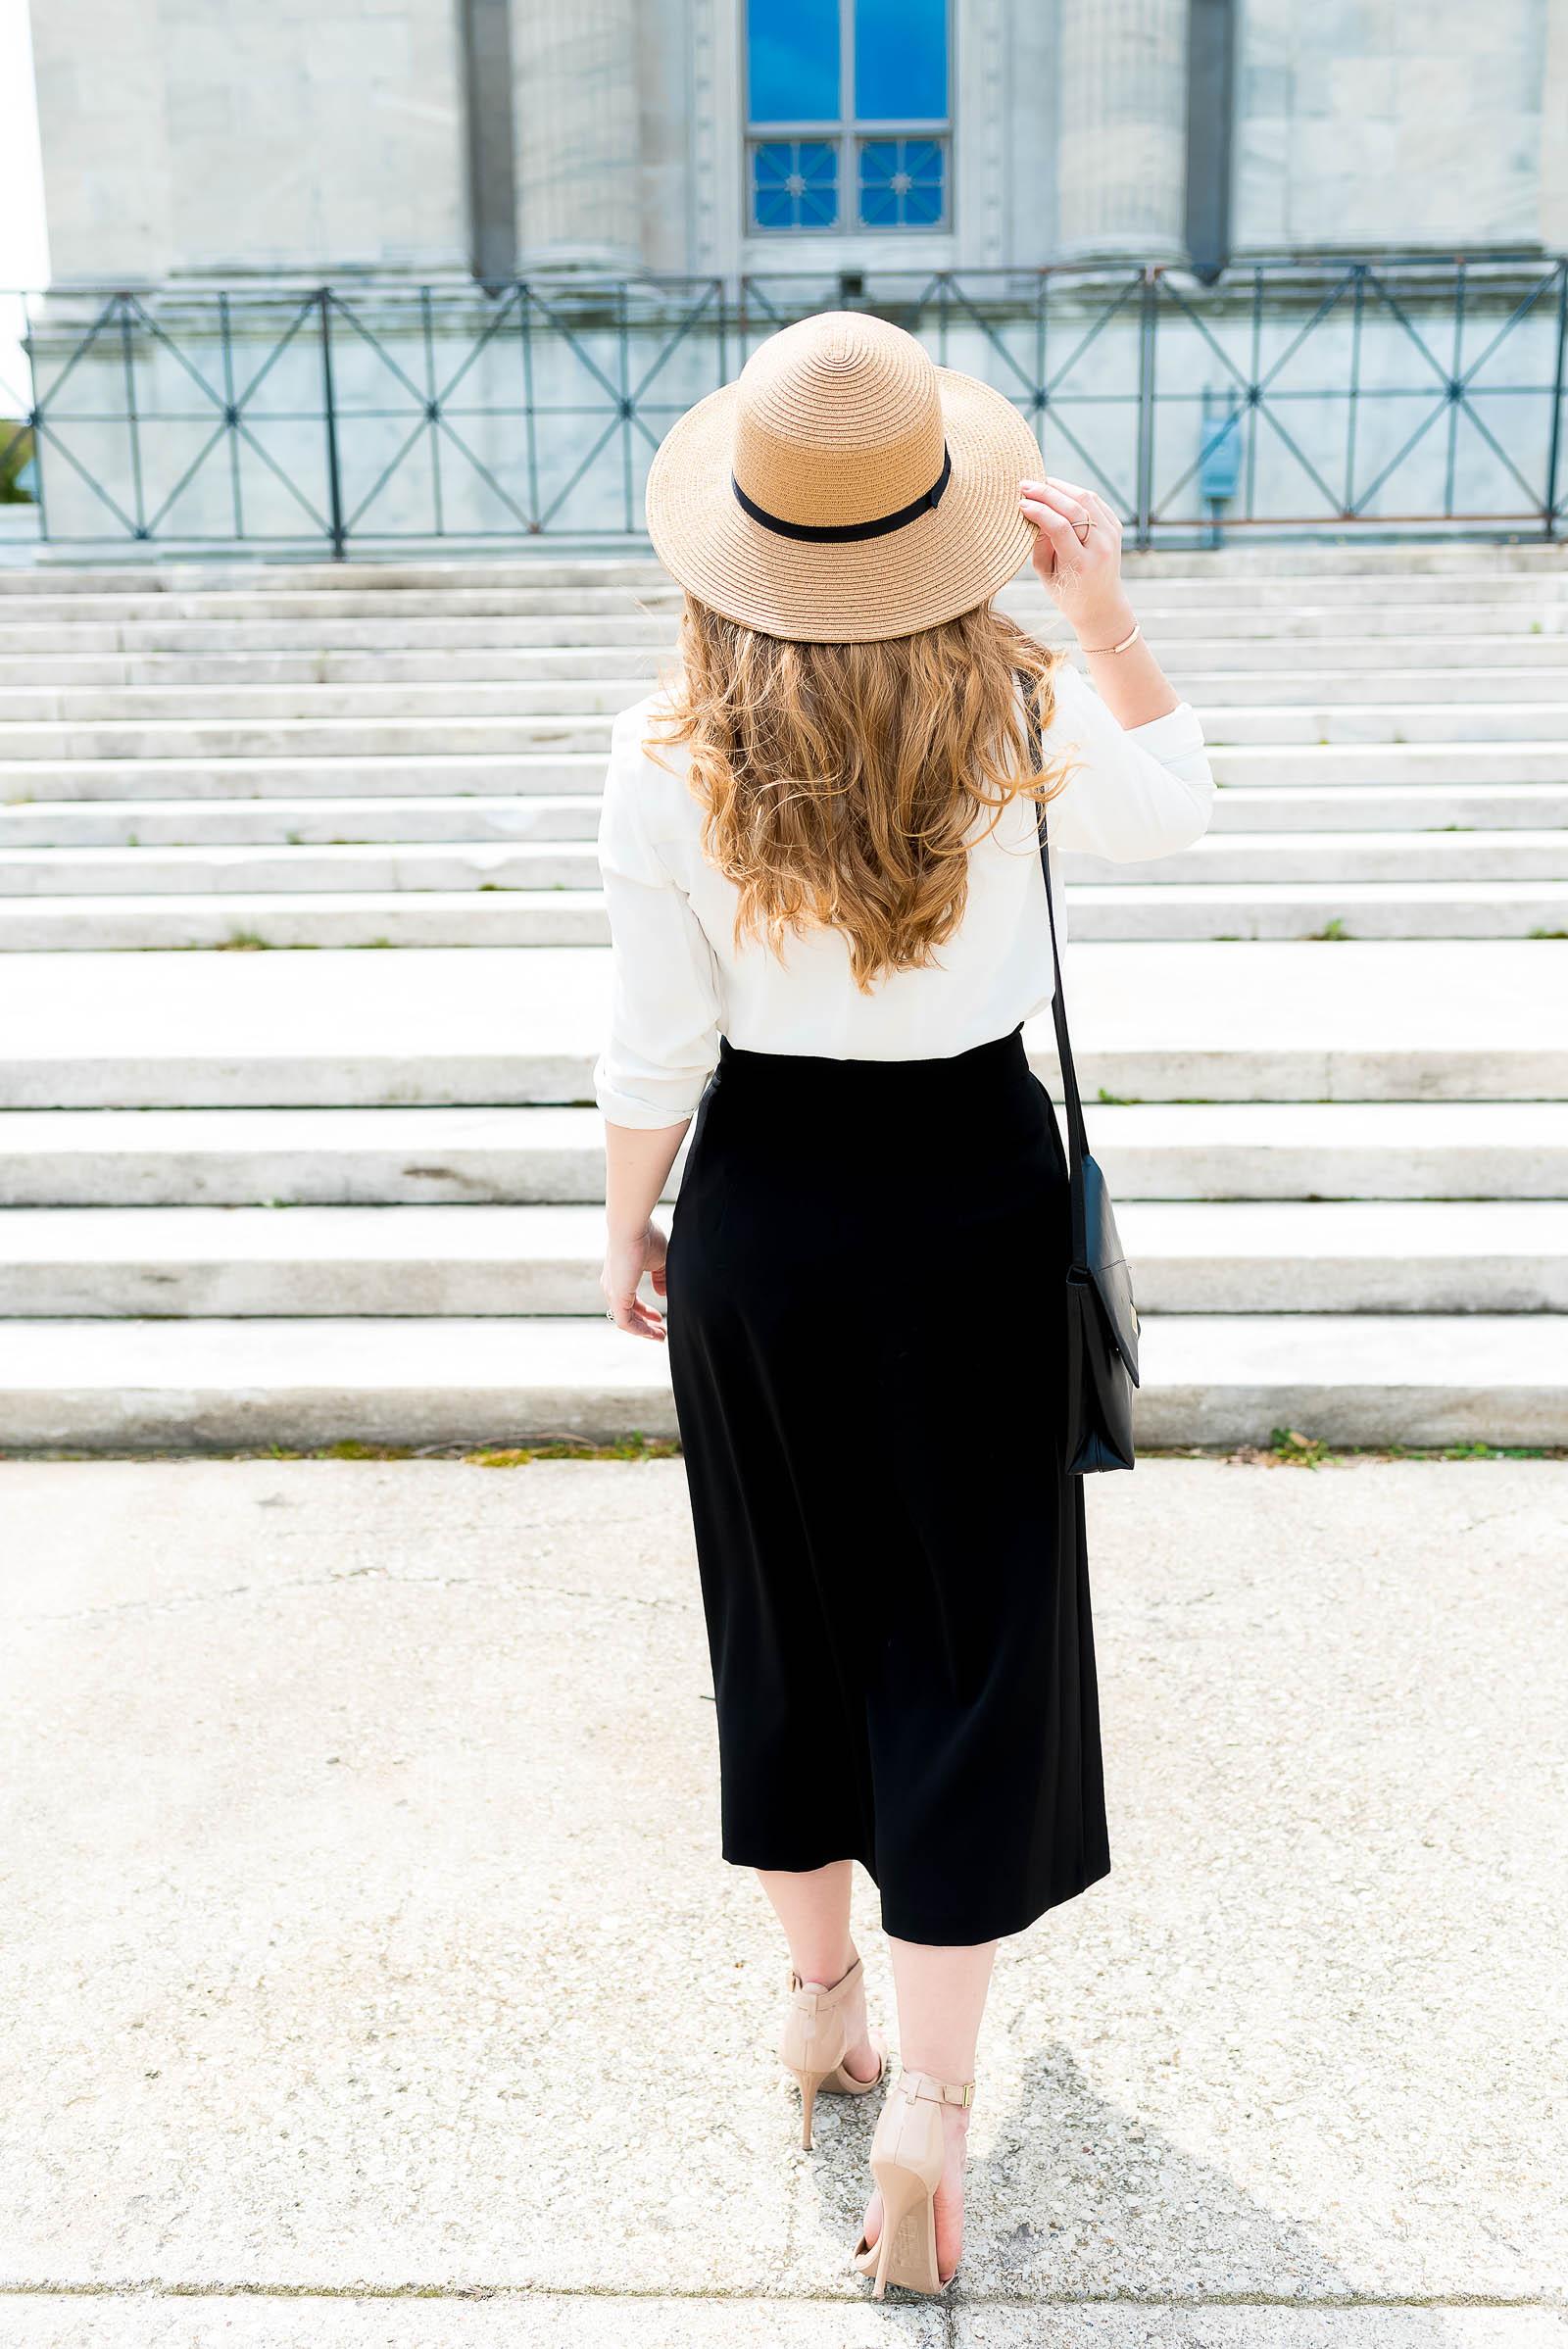 Classic Vintage-Inspired Black and White Summer Outfit